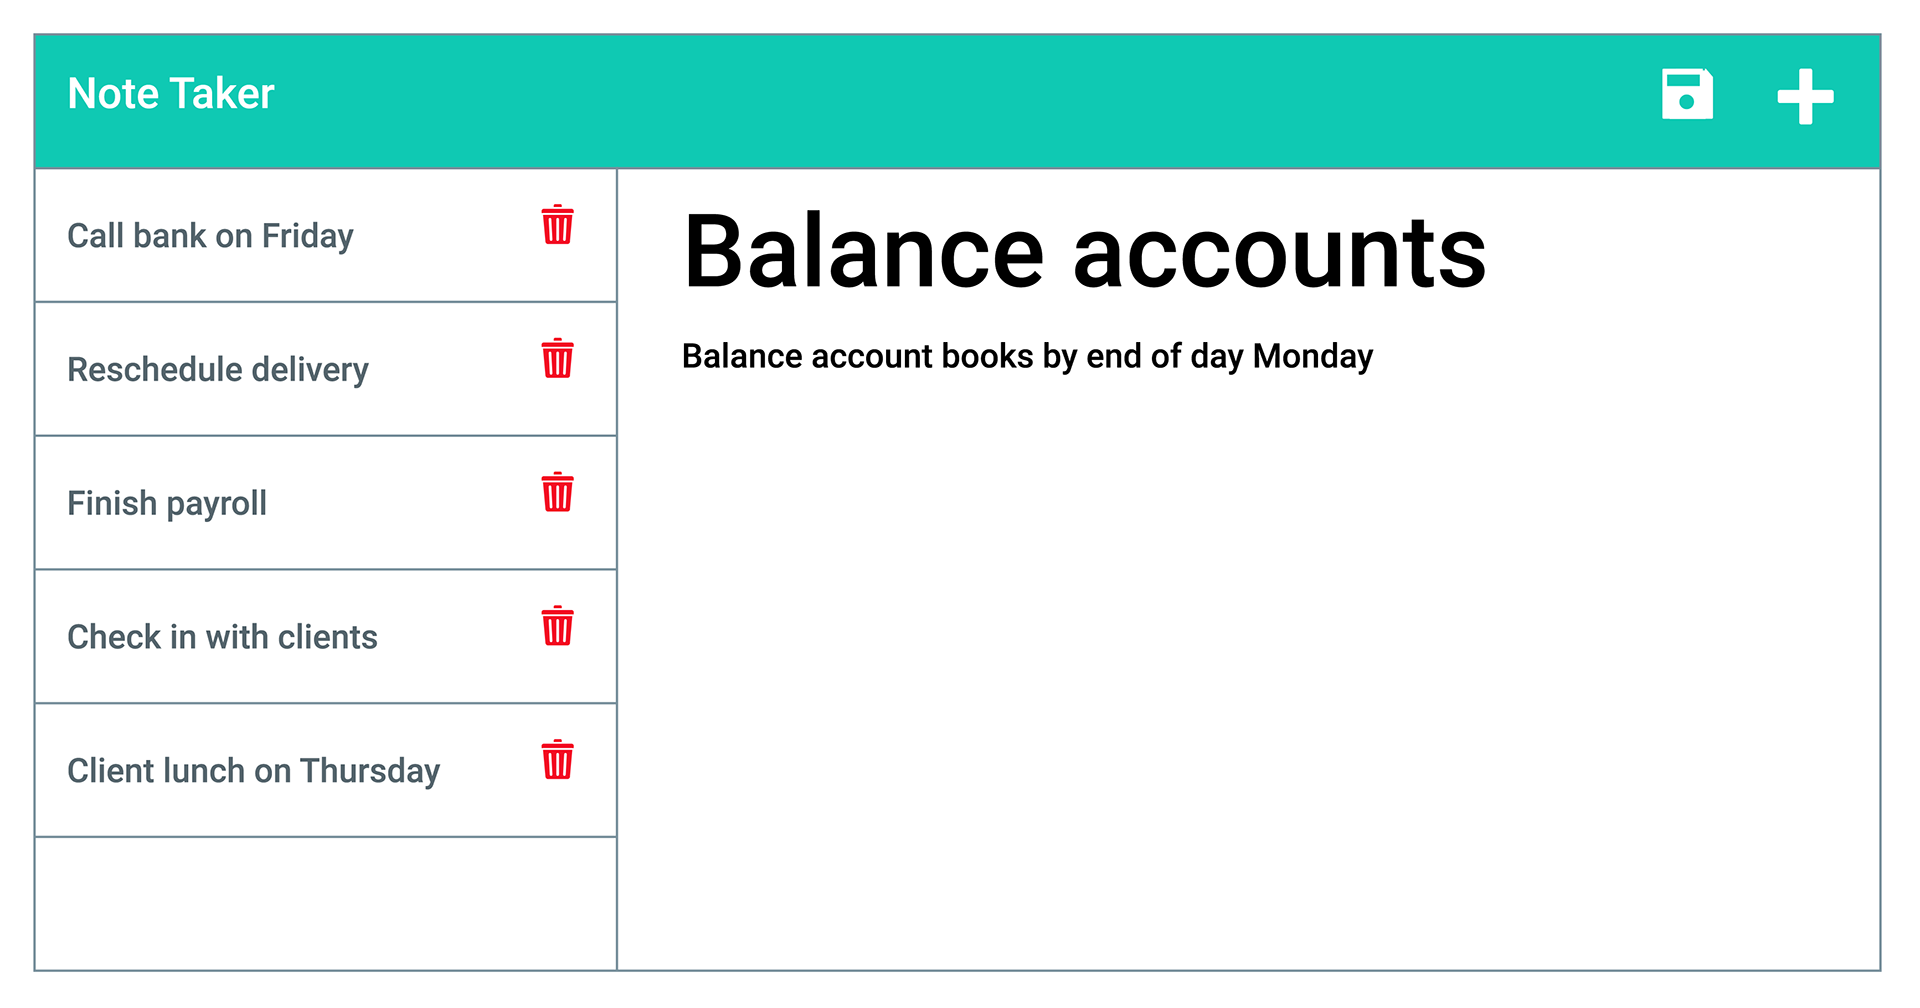 Note titled “Balance accounts” reads, “Balance account books by end of day Monday,” with other notes listed on the left.